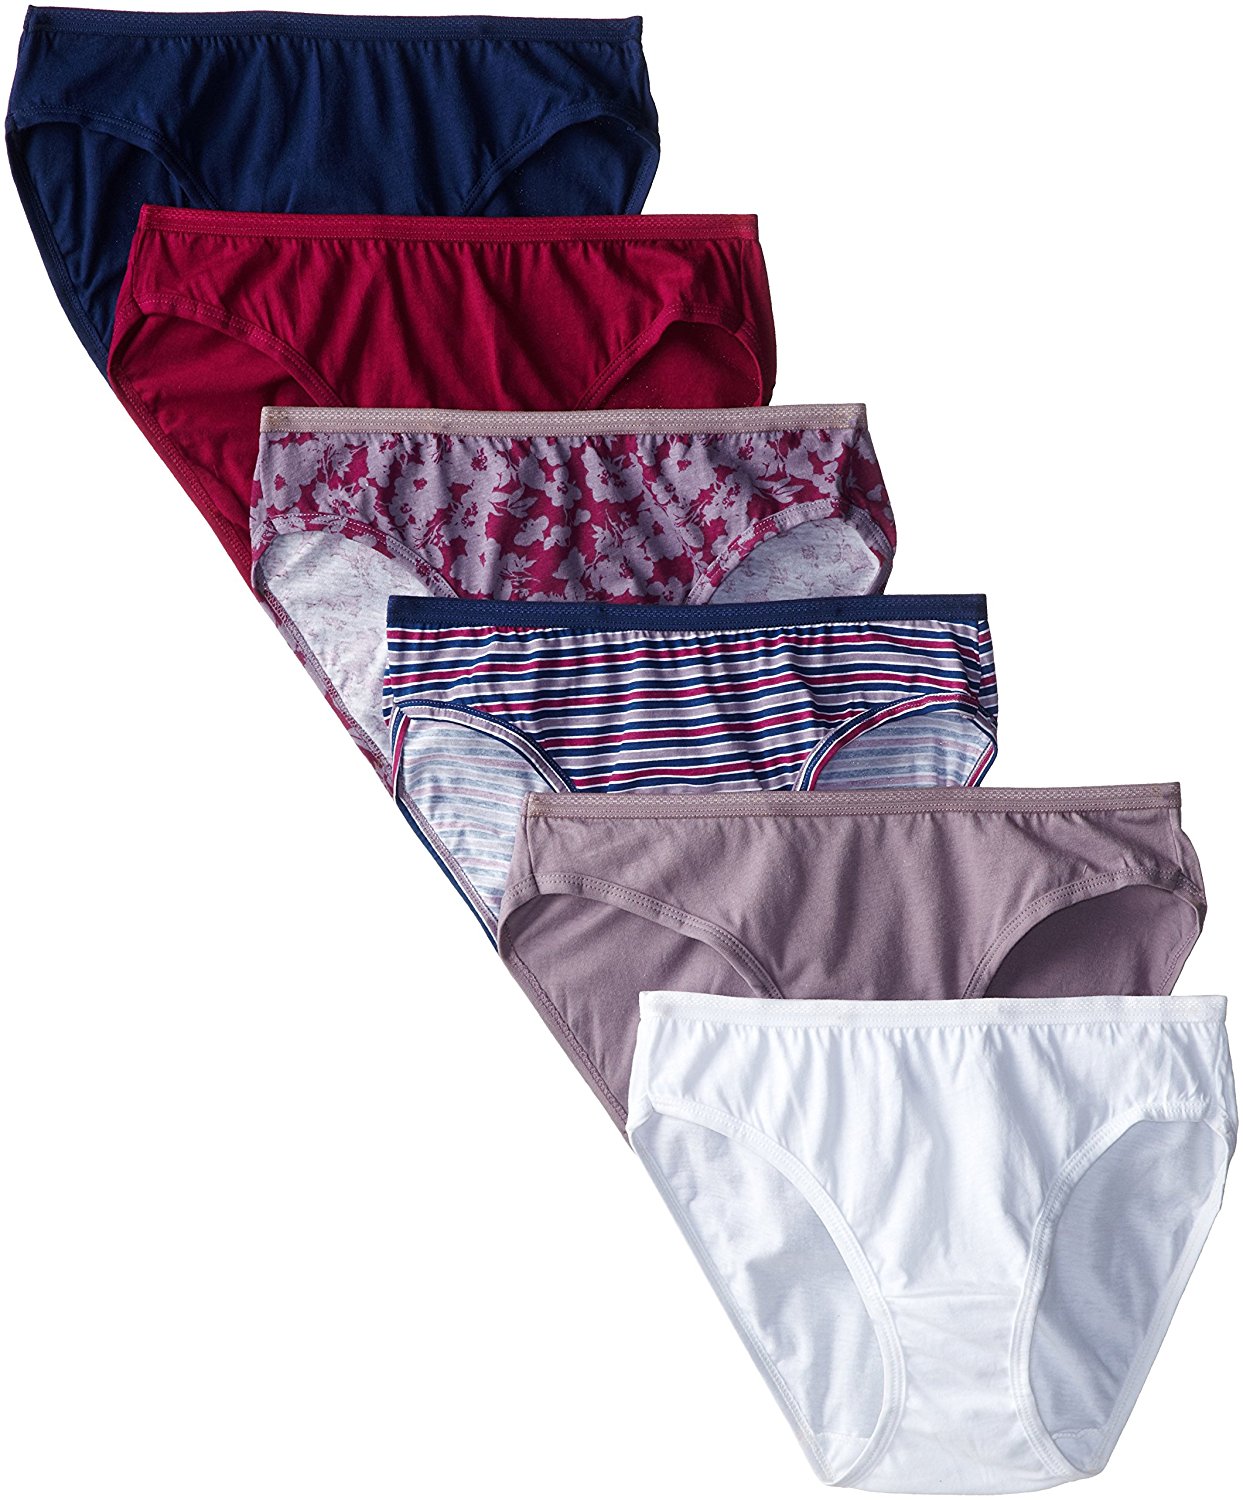 FTL-6DBIKA1 - Fruit of the Loom Womens 6-Pack Assorted Cotton